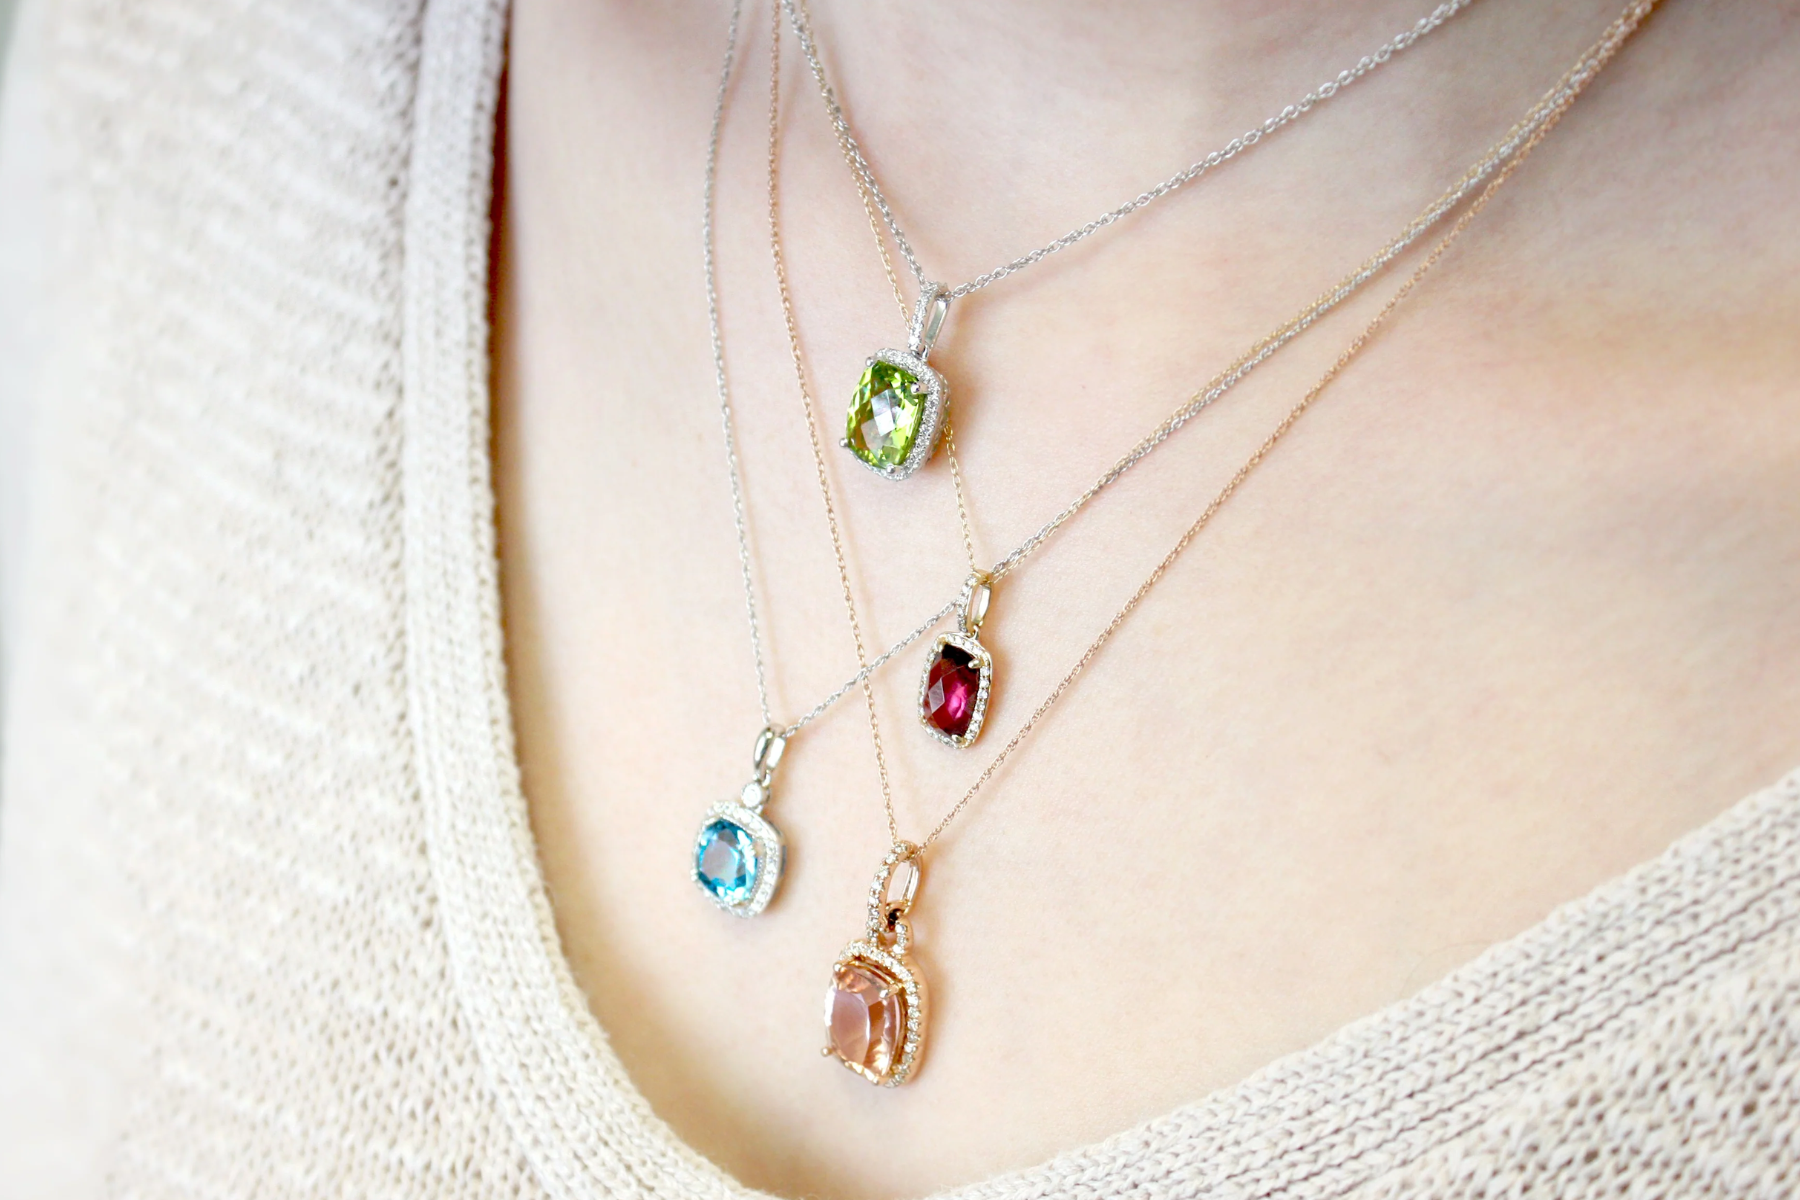 Four birthstone necklaces on a woman's neck